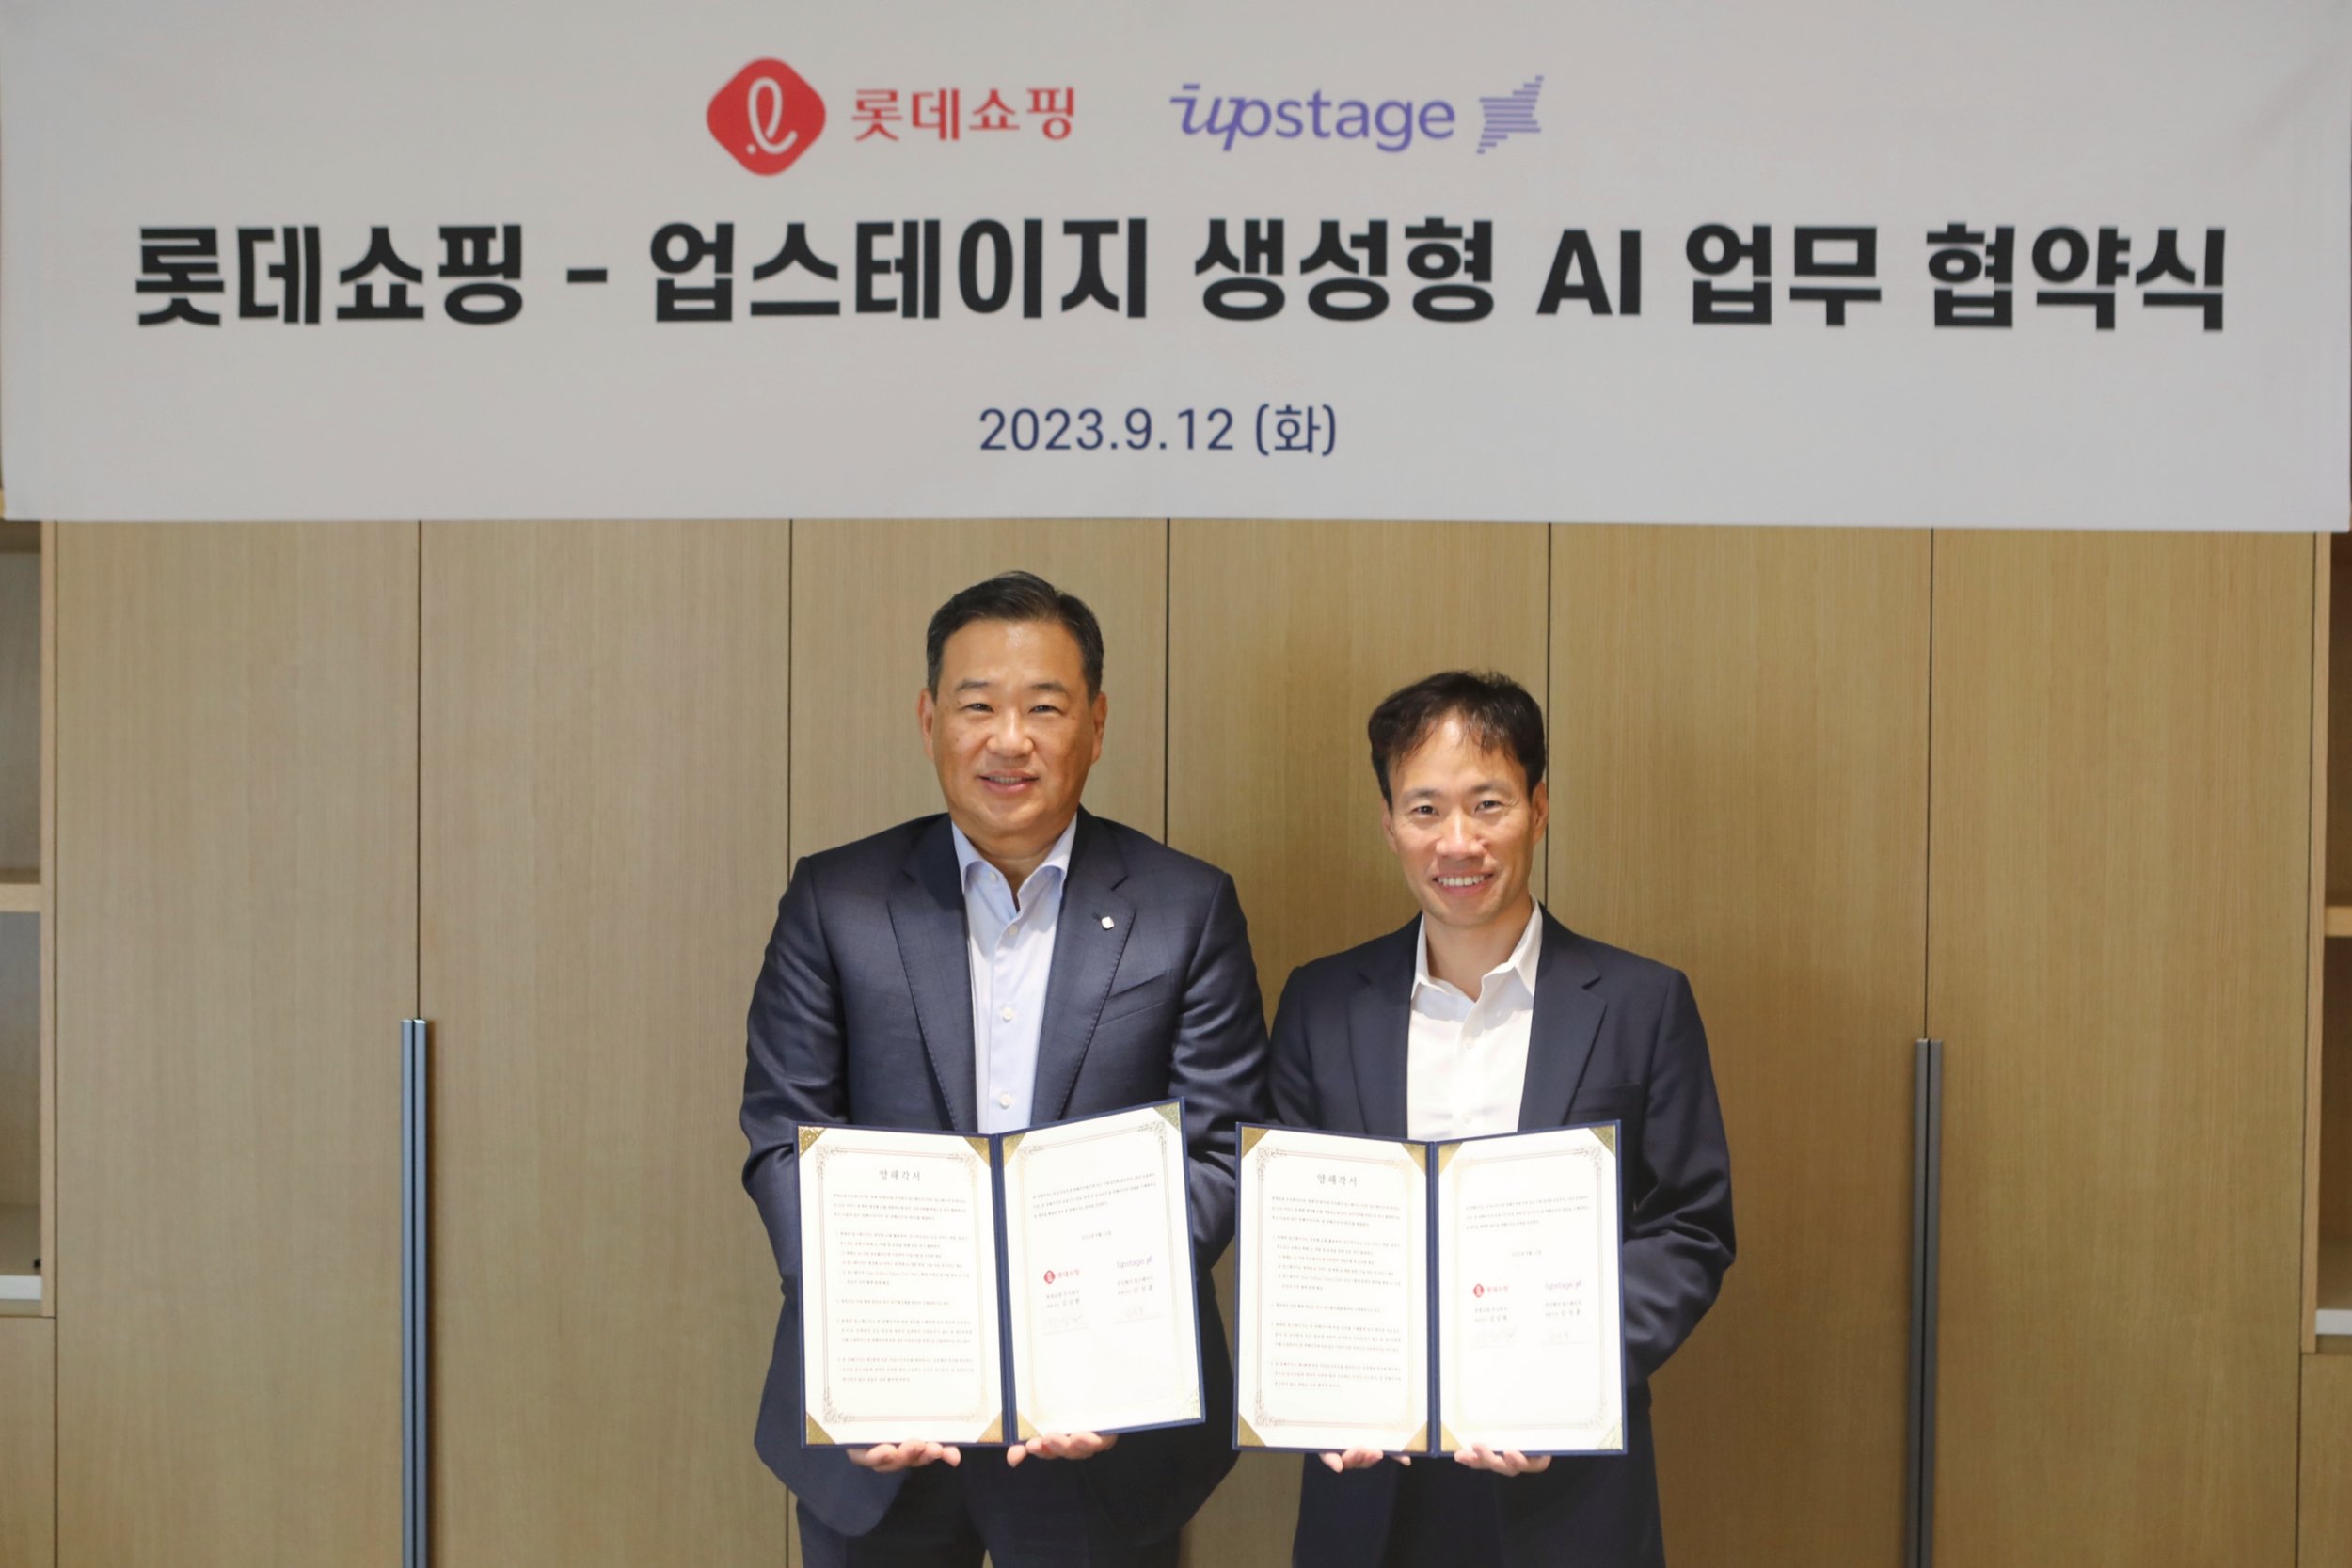 Upstage Signs A Business Agreement With Lotte Shopping To Utilize Generative AI